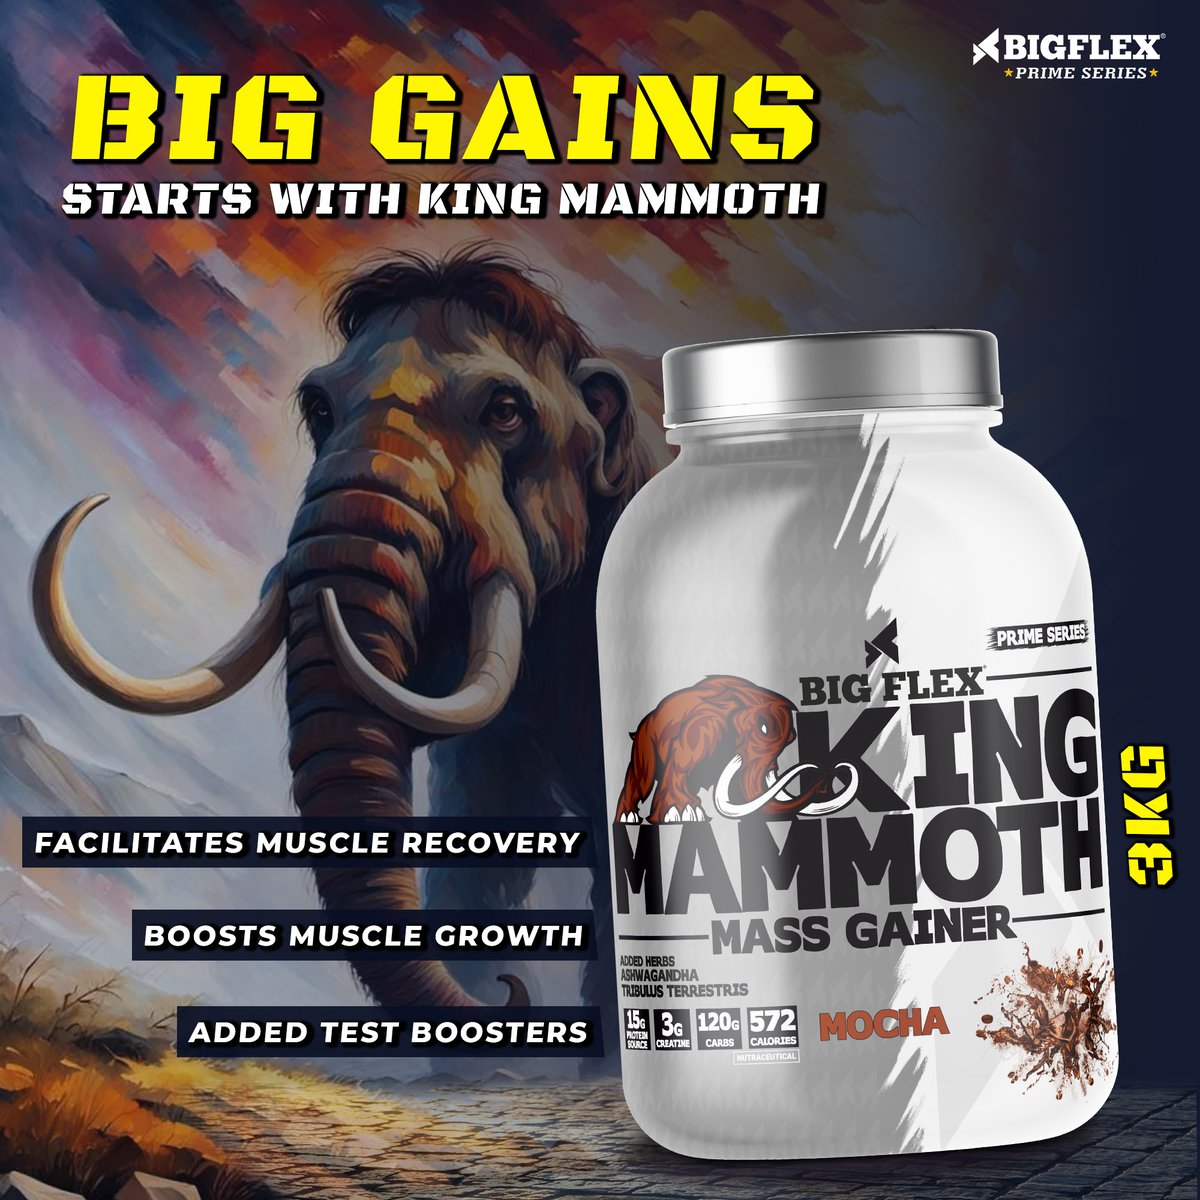 Ready to roar with Bigflex King Mammoth Mass Gainer? 🦣💪 Unleash your inner mammoth, fuel your ambition, and conquer every workout. It's time to unleash the king within!

#mass #gains #gain #gainparty #gaintricks #muscle #muscles #musclecars #muscleup #musclegain #gym #gymrat